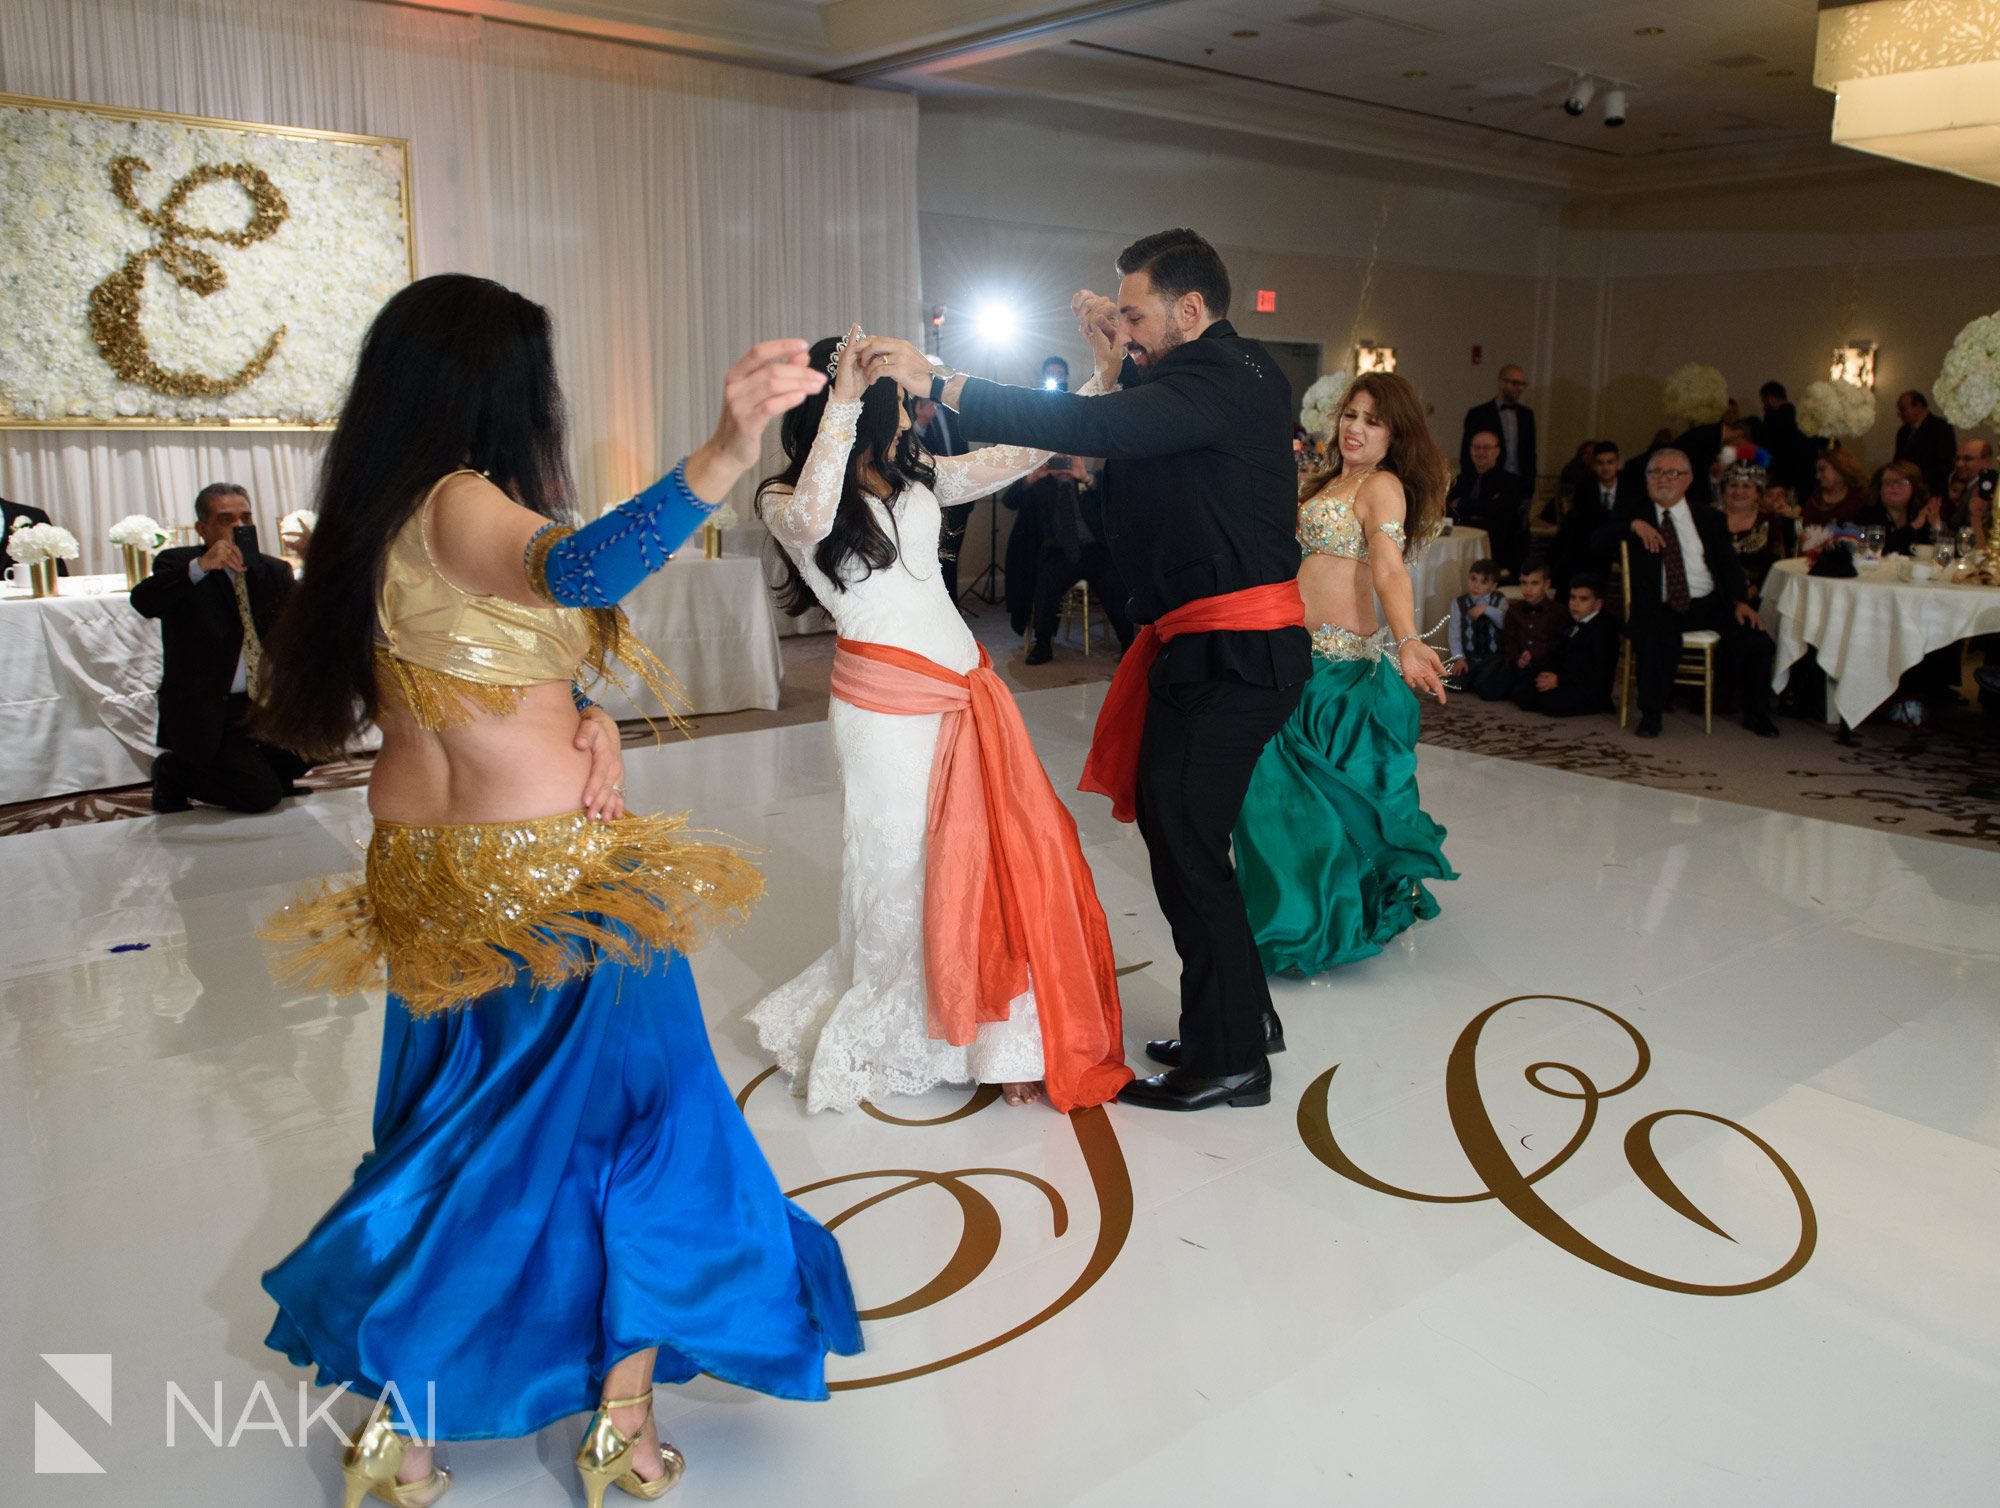 Assyrian wedding reception pictures traditional dancing